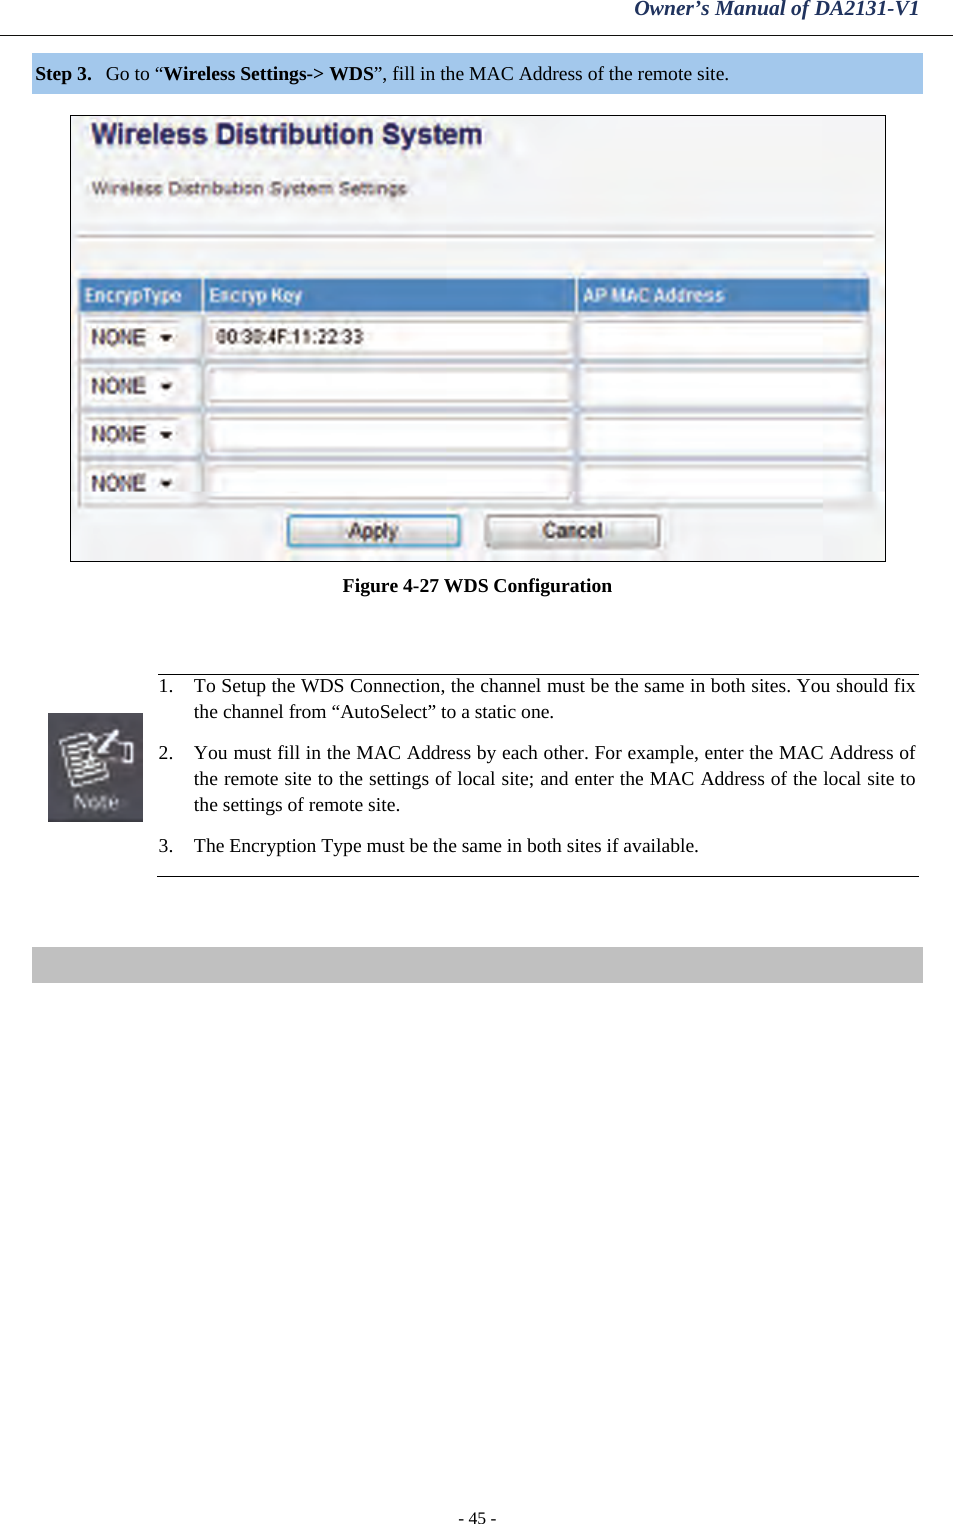 Owner’s Manual of DA2131-V1 - 45 - Step 3. Go to “Wireless Settings-&gt; WDS”, fill in the MAC Address of the remote site.   Figure 4-27 WDS Configuration    1. To Setup the WDS Connection, the channel must be the same in both sites. You should fix the channel from “AutoSelect” to a static one. 2. You must fill in the MAC Address by each other. For example, enter the MAC Address of the remote site to the settings of local site; and enter the MAC Address of the local site to the settings of remote site. 3. The Encryption Type must be the same in both sites if available.   